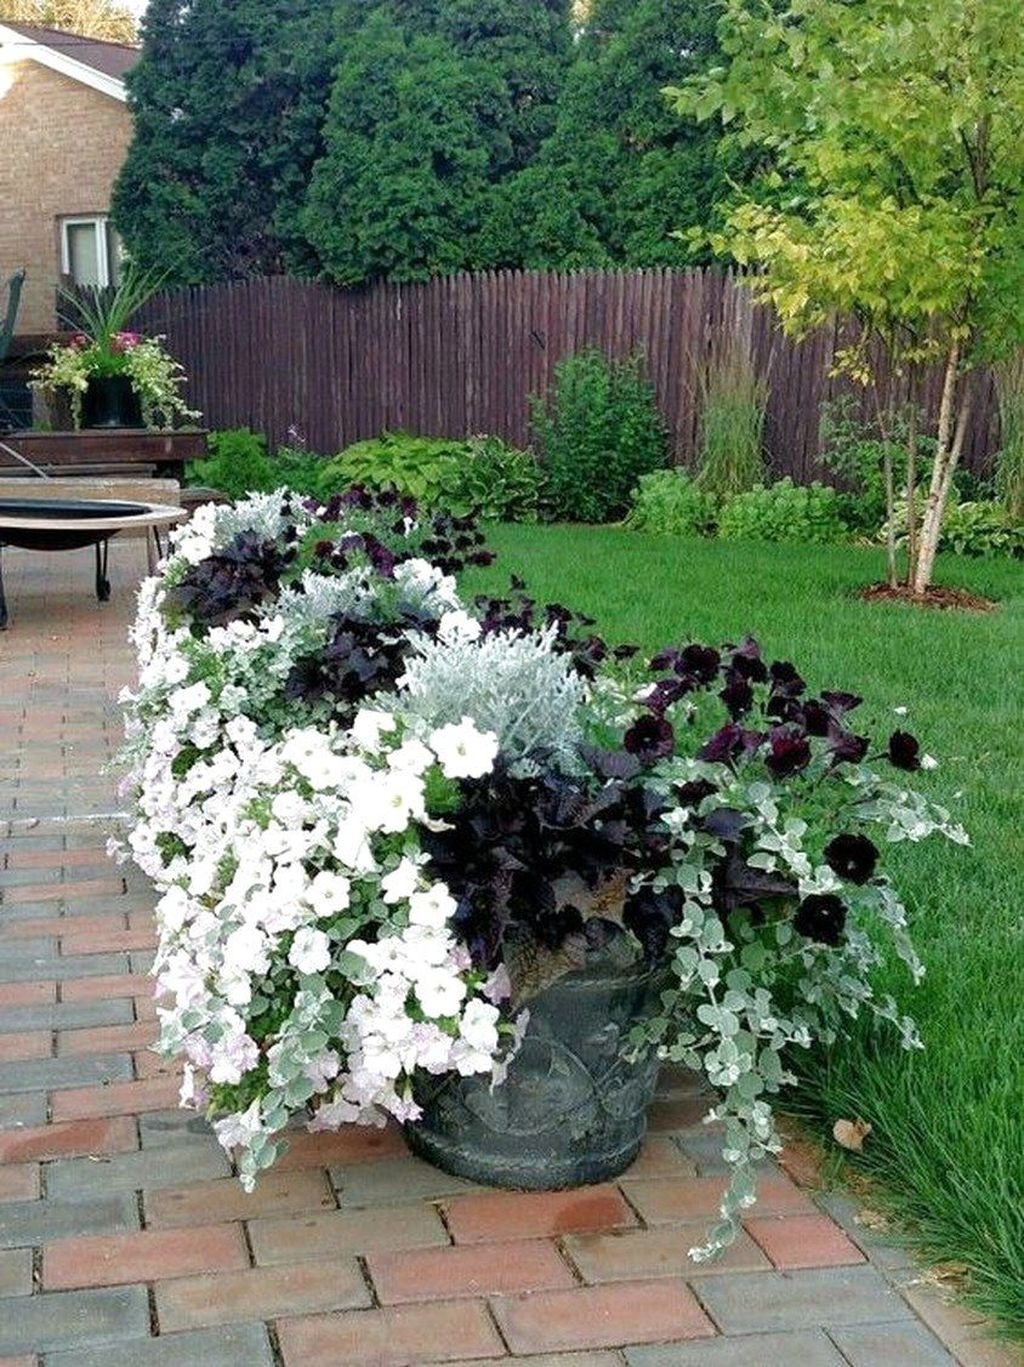 Stunning Small Flower Gardens And Plants Ideas For Your Front Yard 10